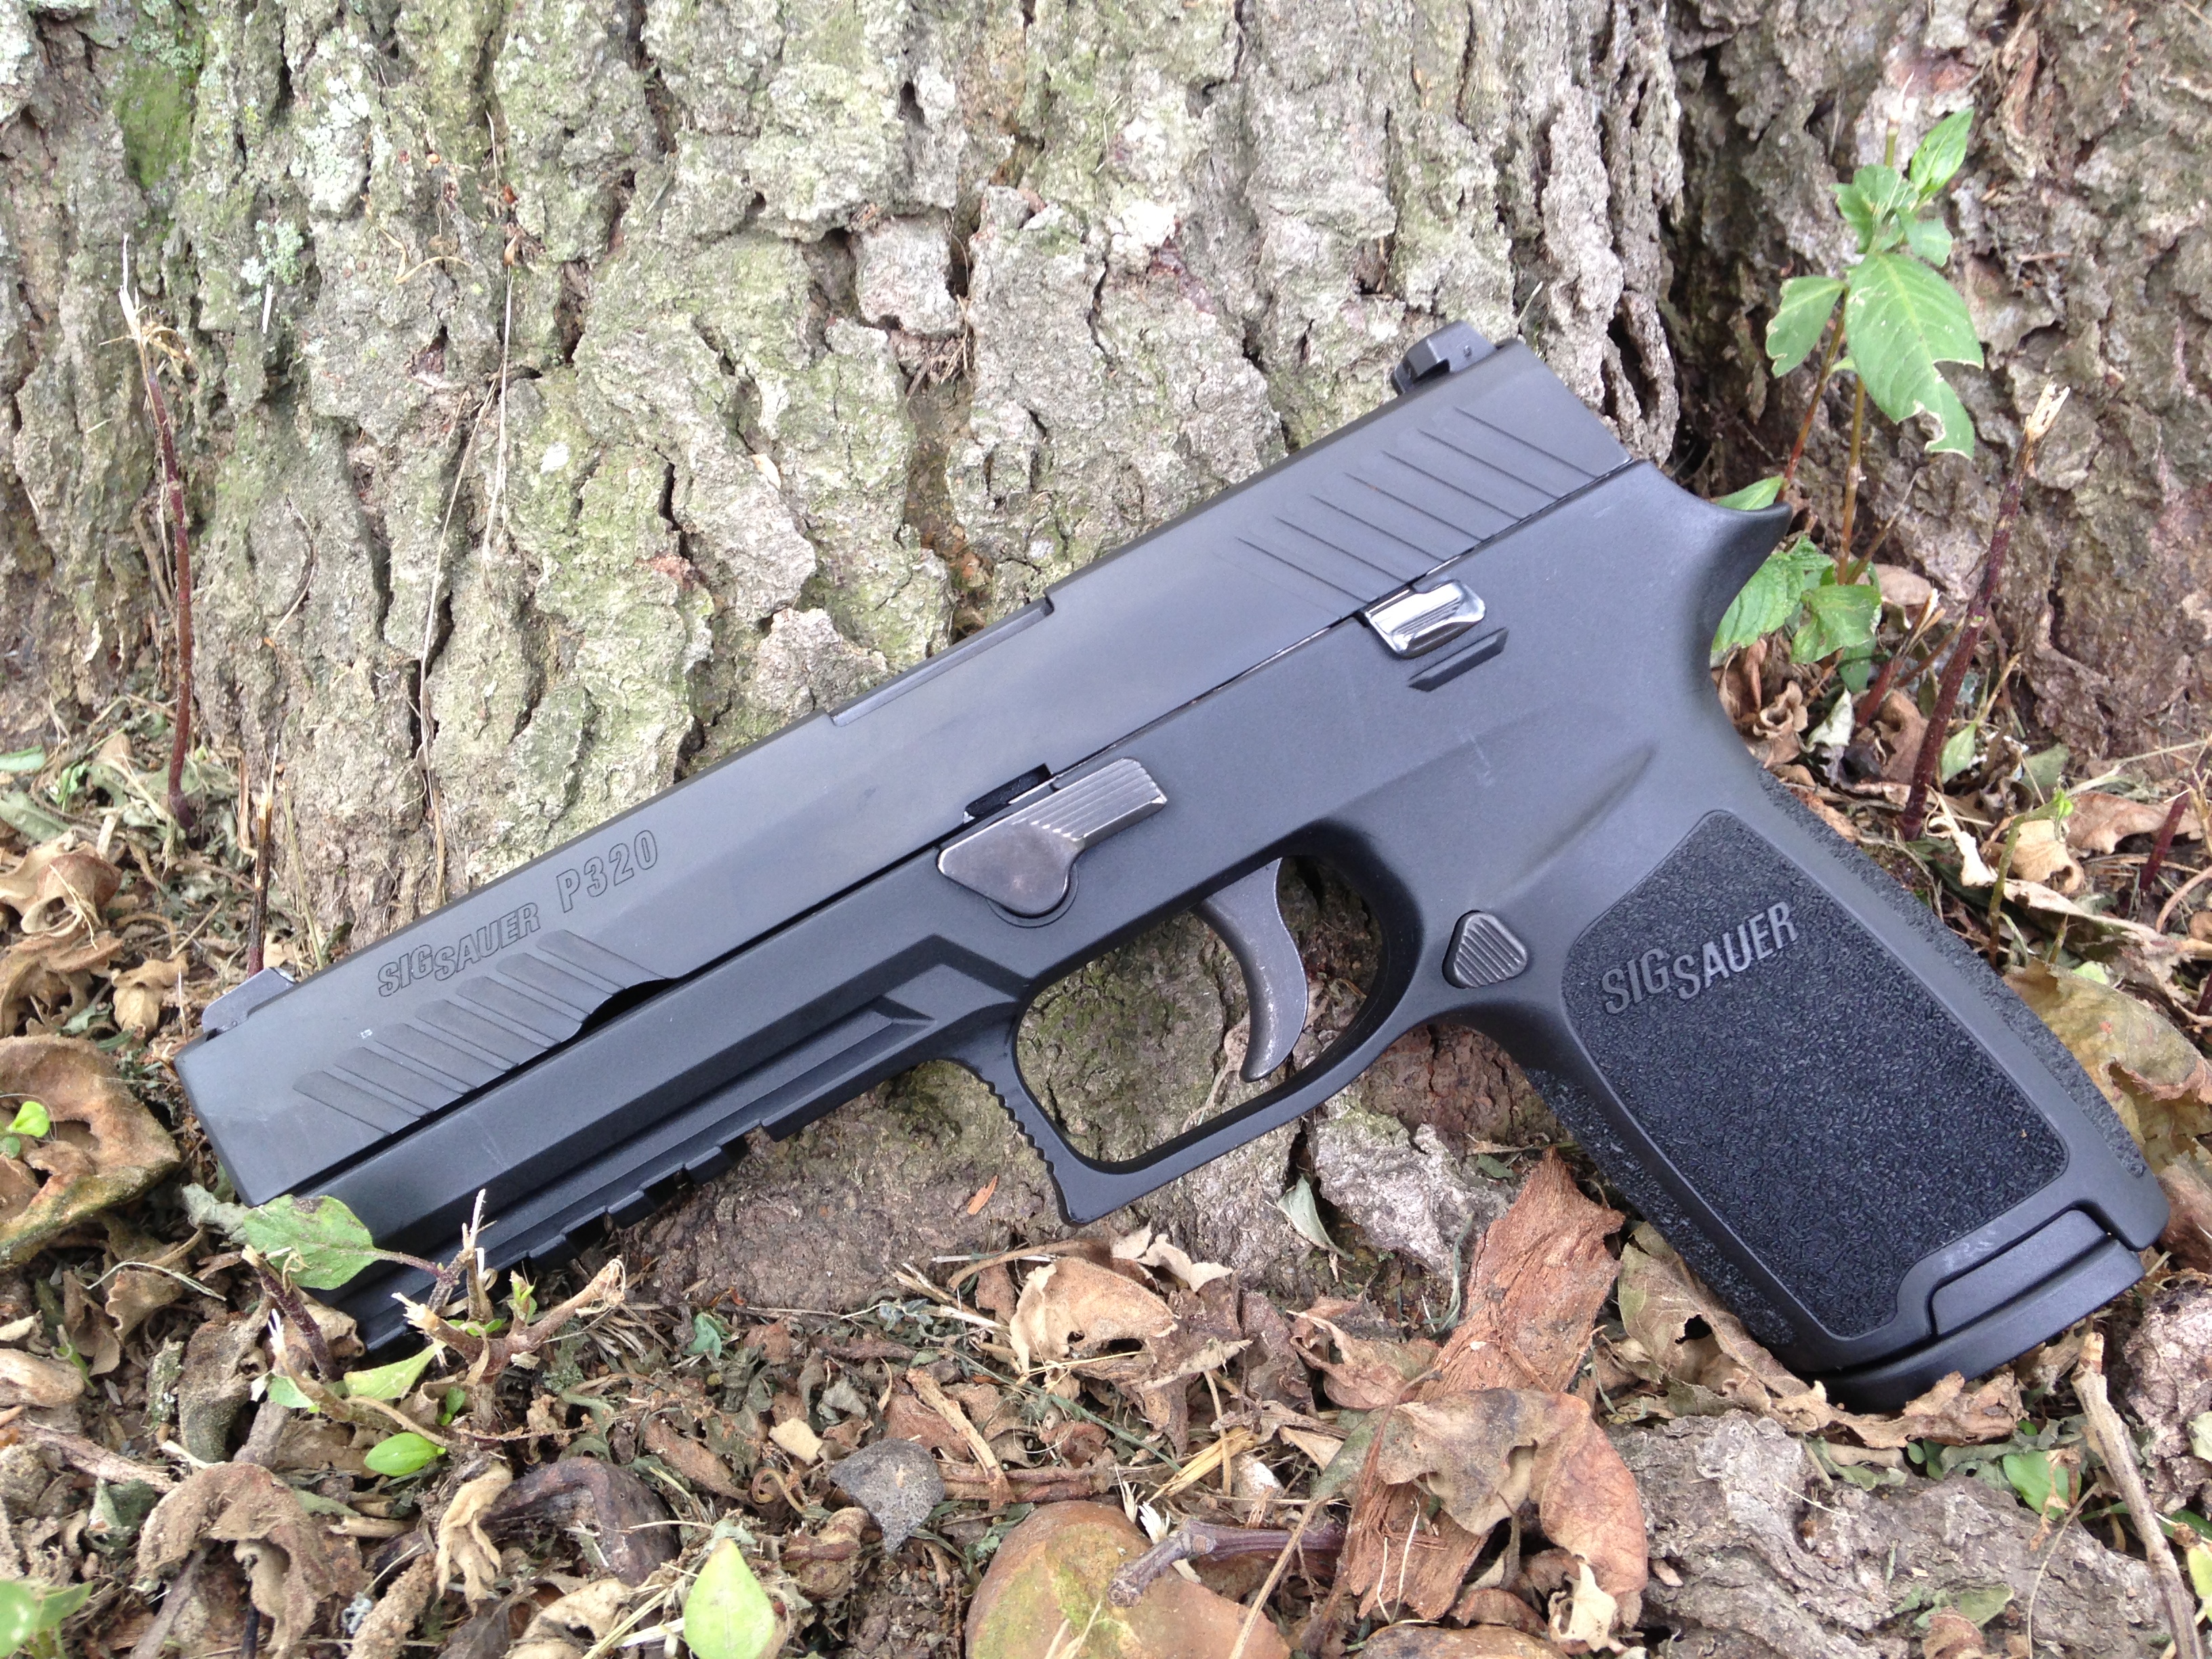 Picked Up My Sig Sauer P320 Yesterday And Took It To The Range For A